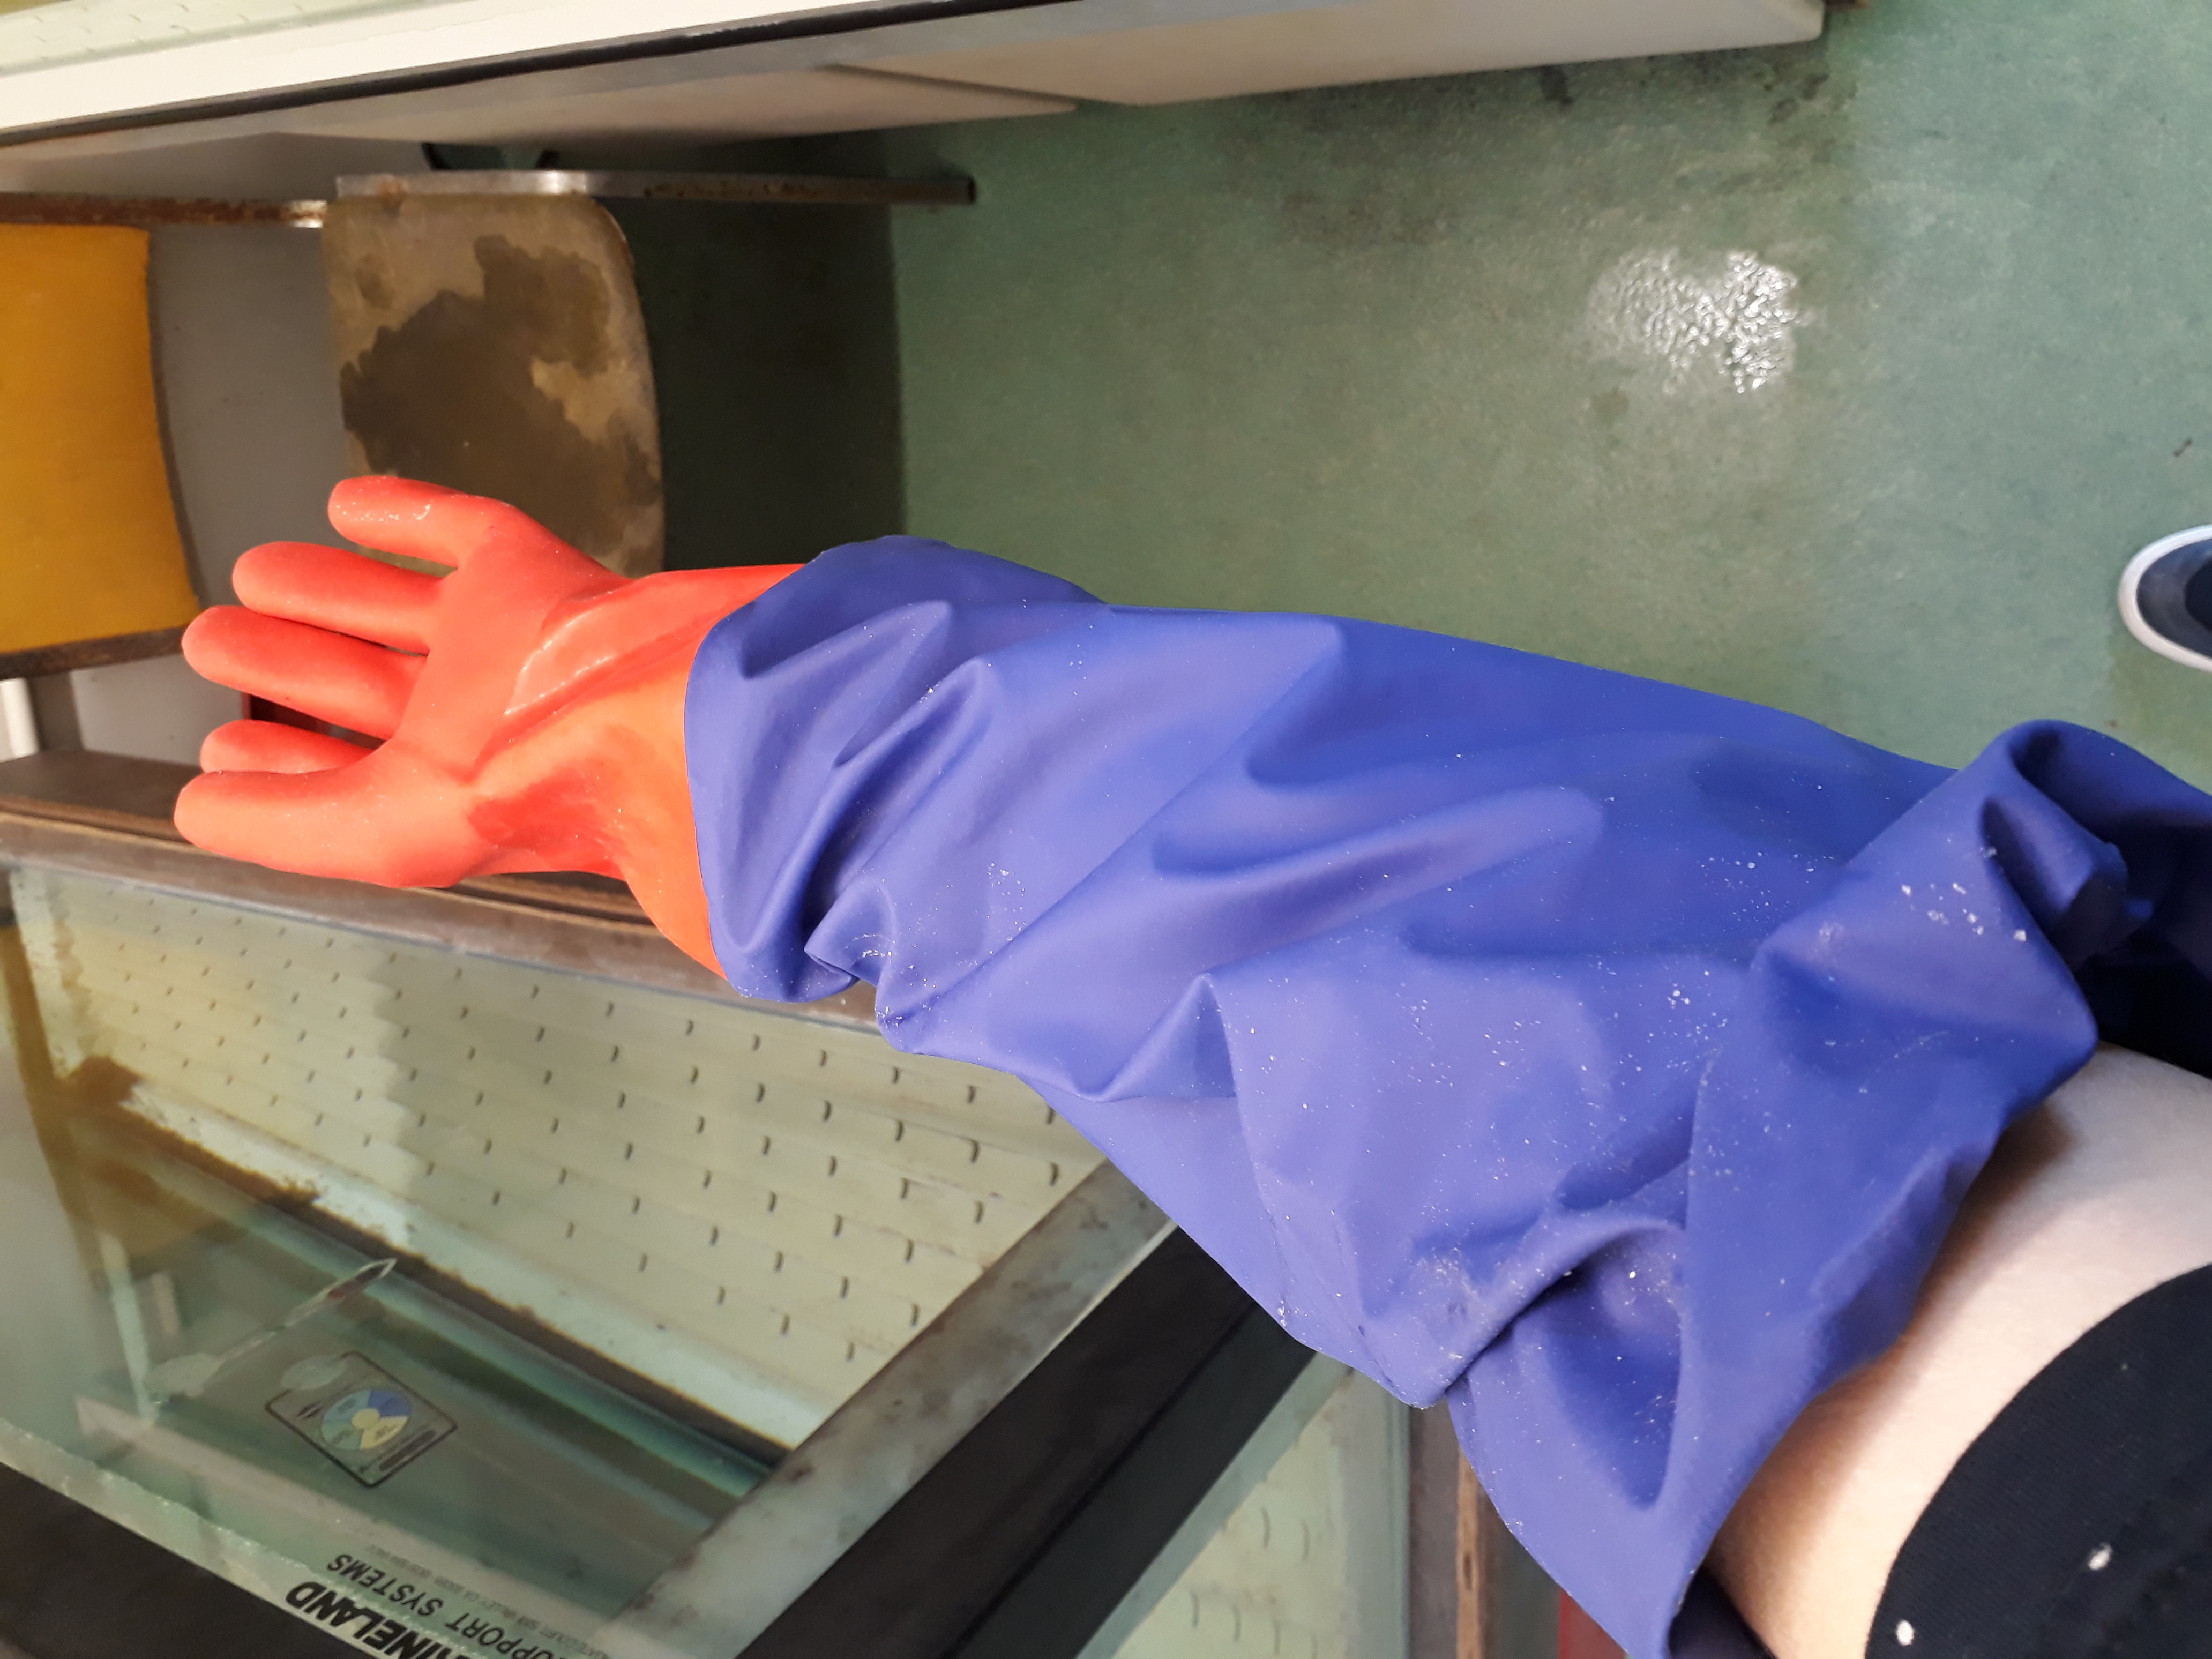 A shoulder length rubber glove used in a research lab to reach into fish tanks. If contaminated, would be thrown in the garbage.